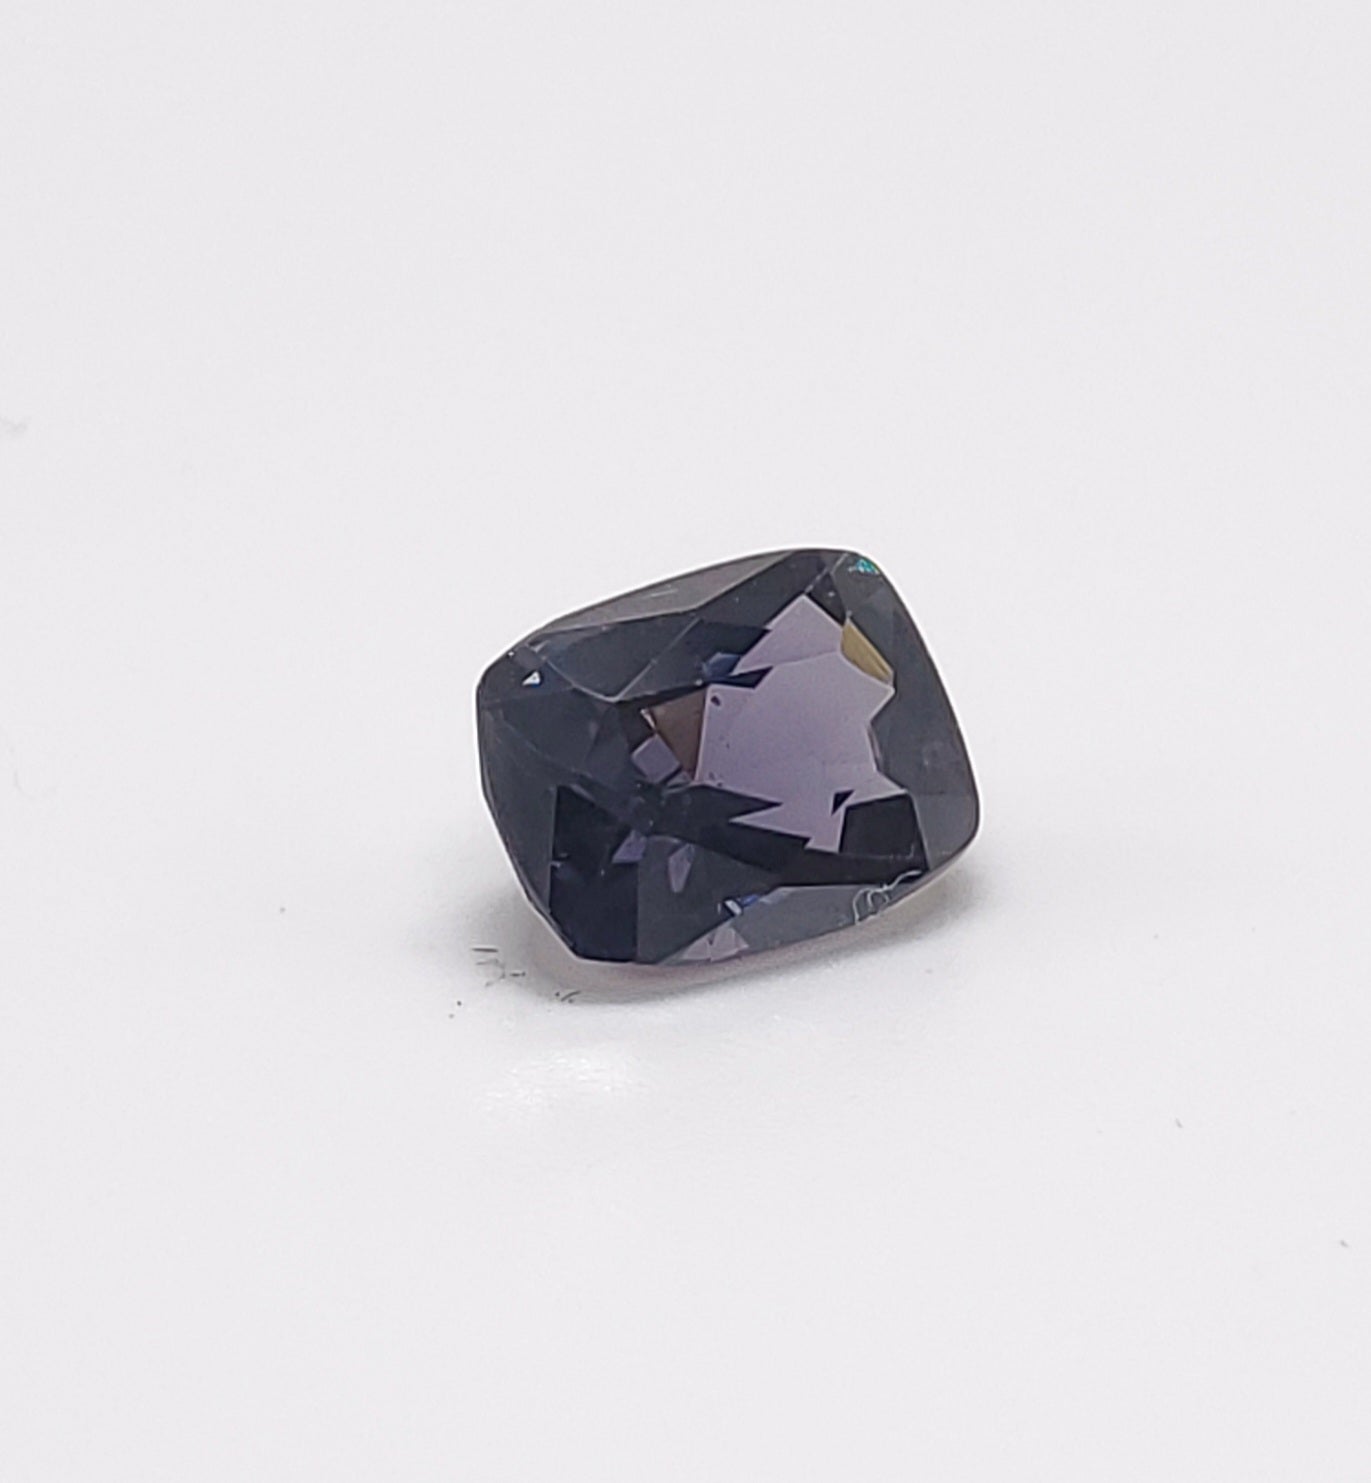 This pretty Purple spinel Cushion cut , weighs 1.81 carats and would make a beautiful 3-stone ring, though its shape lends itself to a variety of possibilities! It measures 8.09 x 6.11 x 4.53 millimeters, is eye clean, brilliant, and well-faceted,